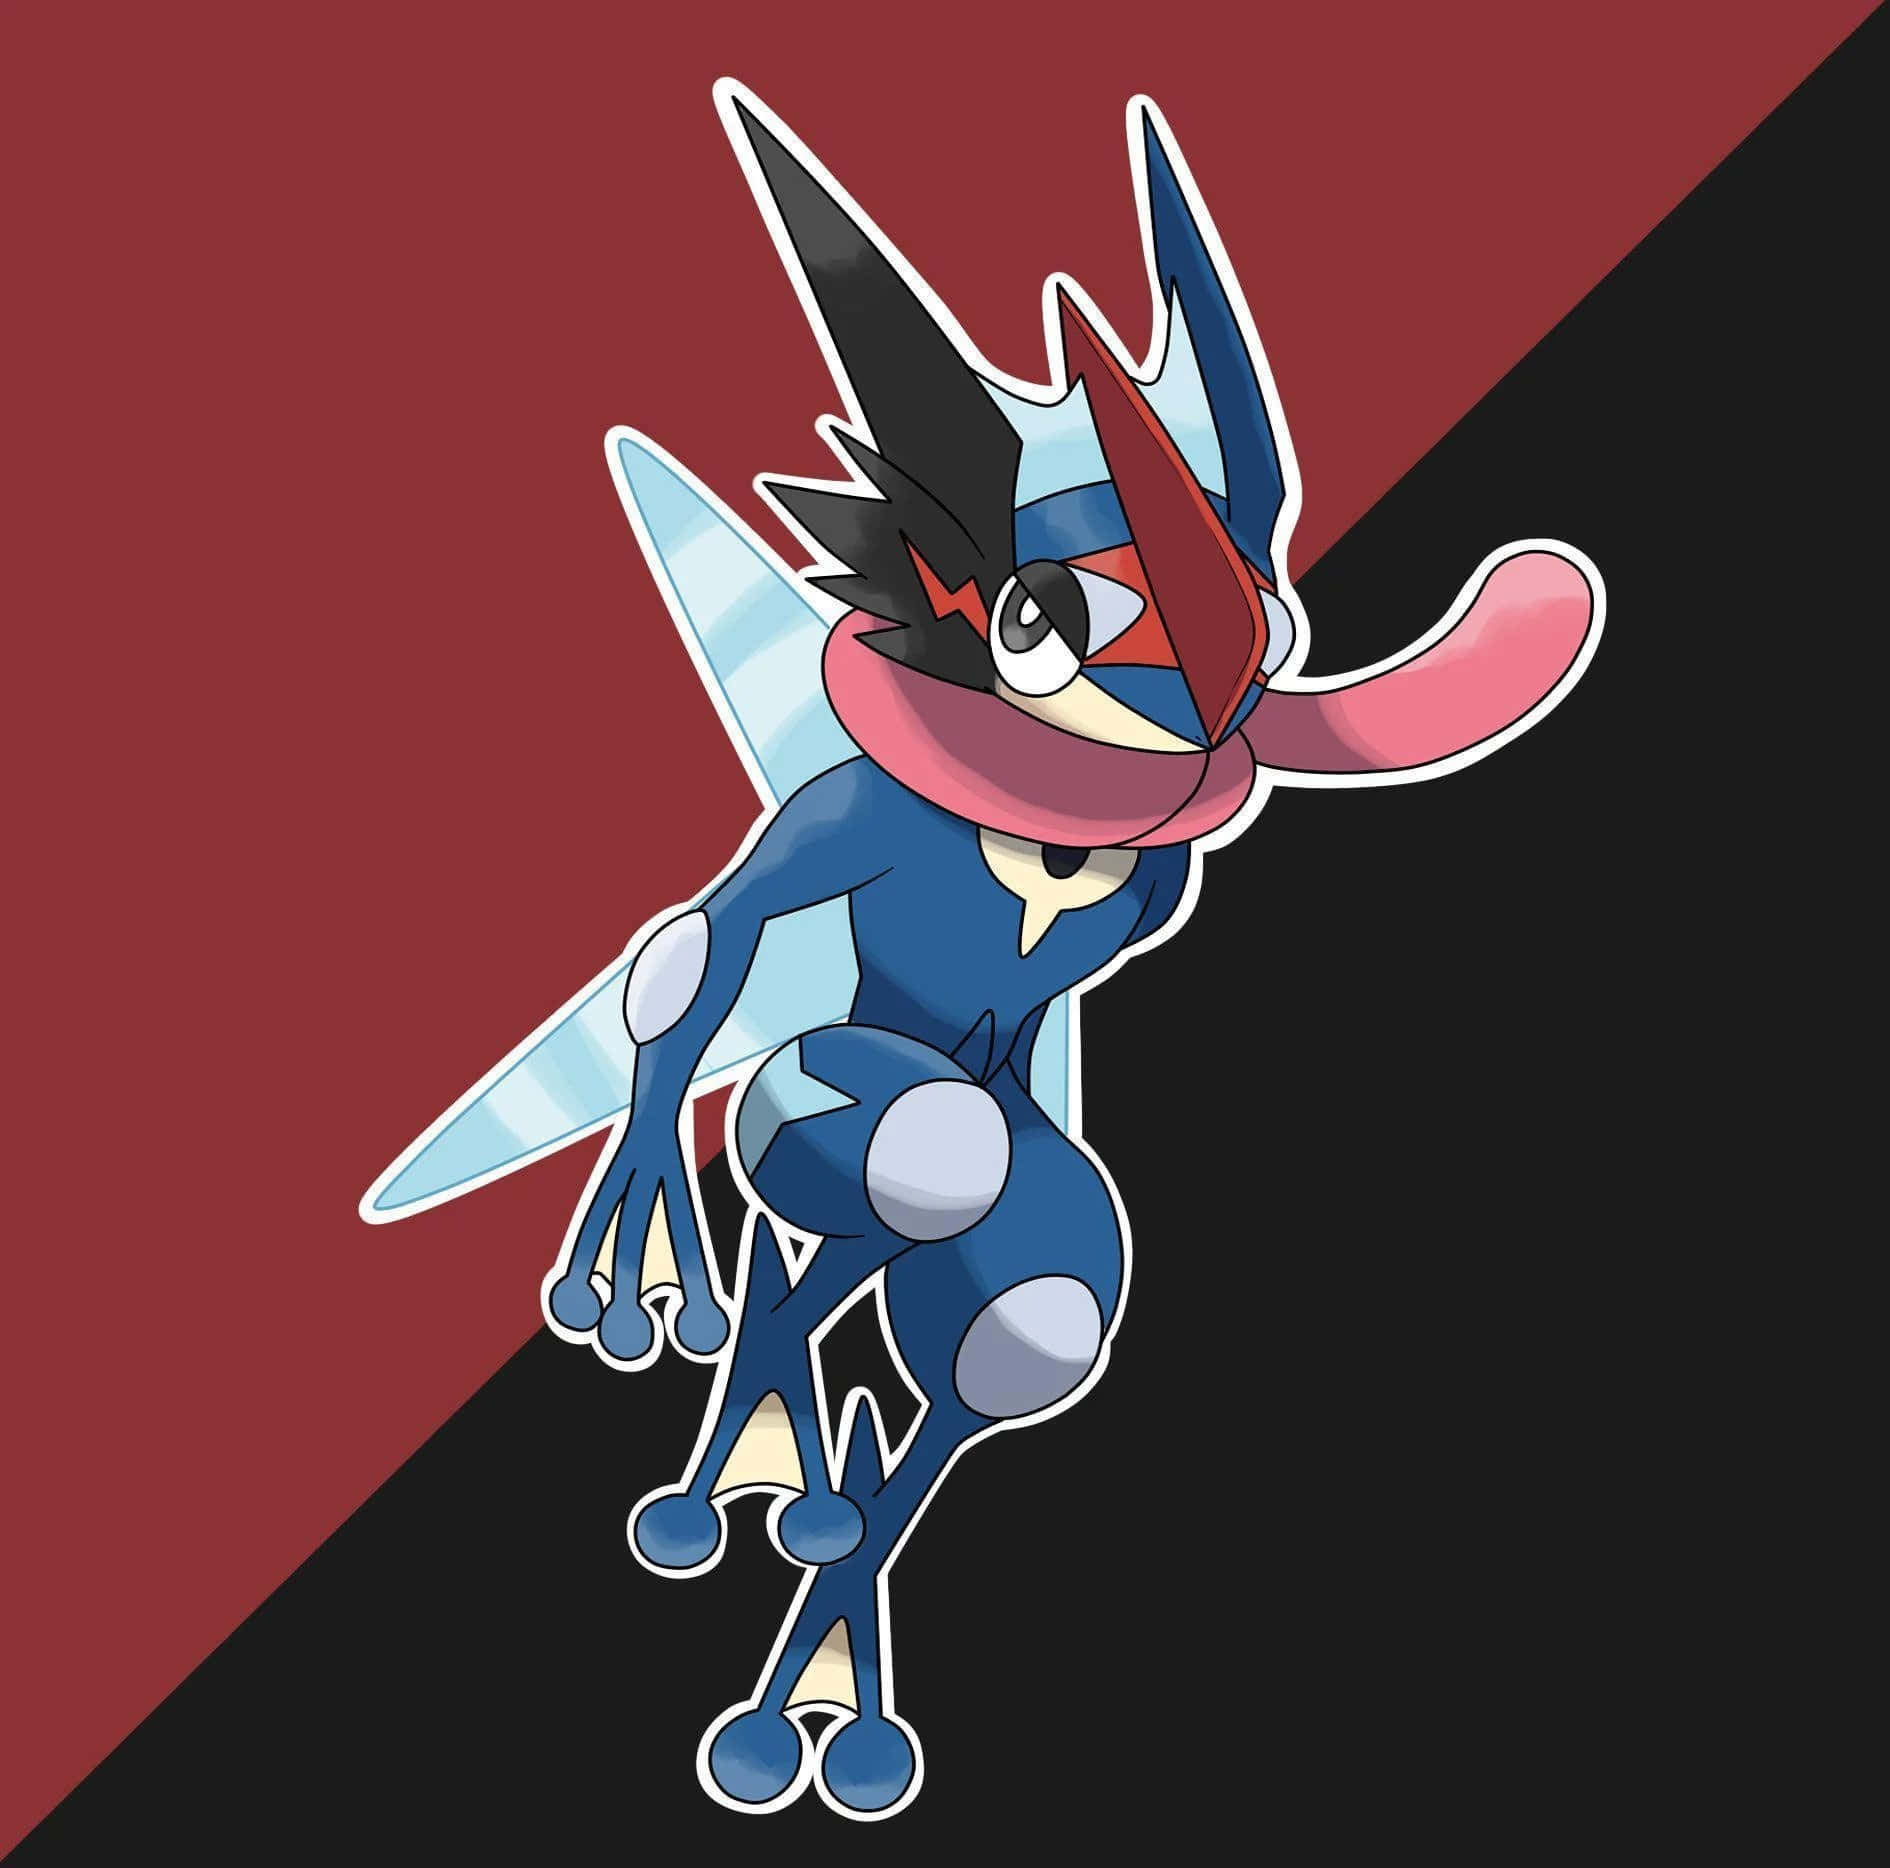 A Greninja ready to take on any challenge.